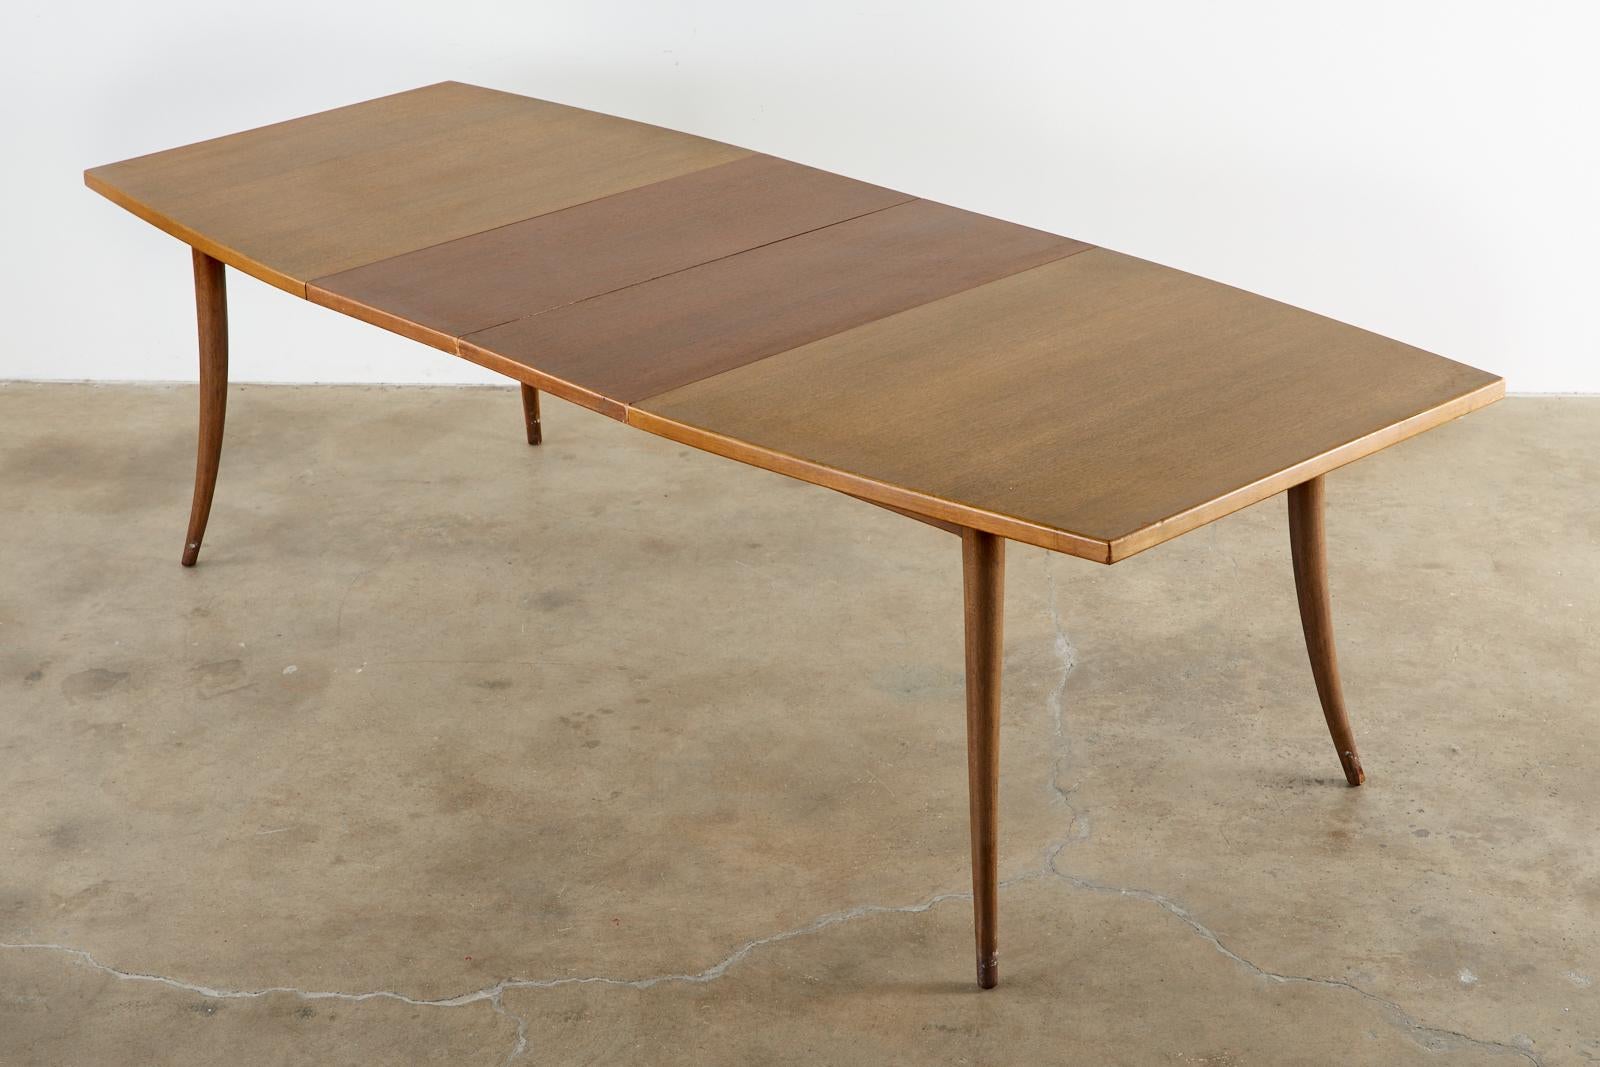 Stylish Mid-Century Modern dining table designed by Harvey Probber featuring two 16 inch extending leaves for a total of 98 inches. The iconic table has sabre formed legs with a dramatic profile and tapered design. Solid and sturdy with a 66 inch